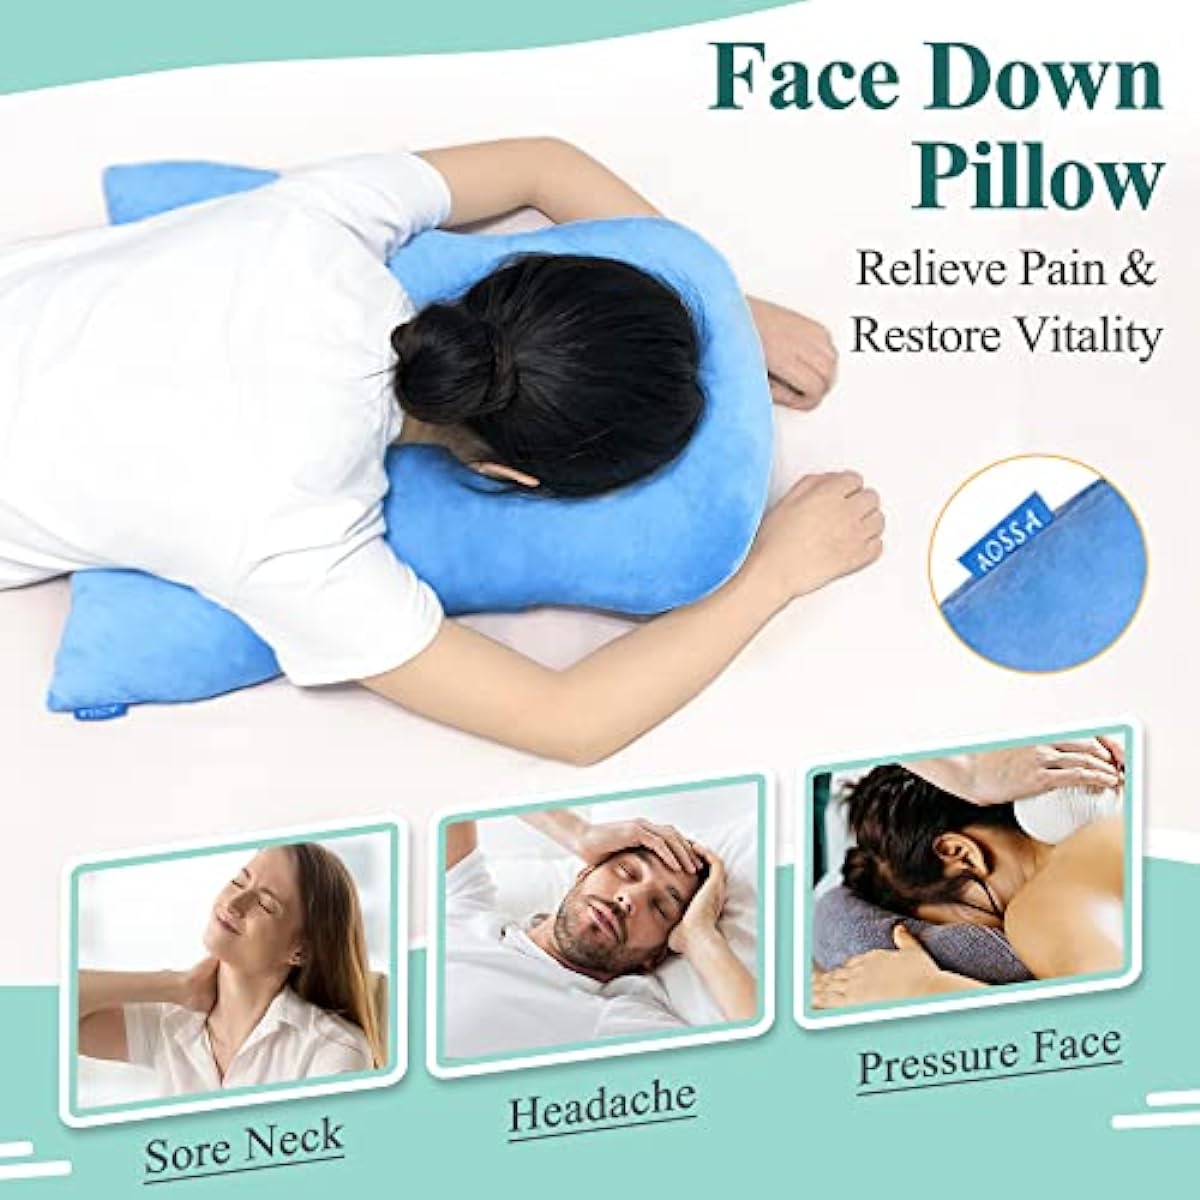 Face Down Pillow After Eye Surgery Stomach Sleeping Prone Cushion Vitrectomy Retina Surgery Recovery Equipment Massage Pillow Face Down Support with Head Hole